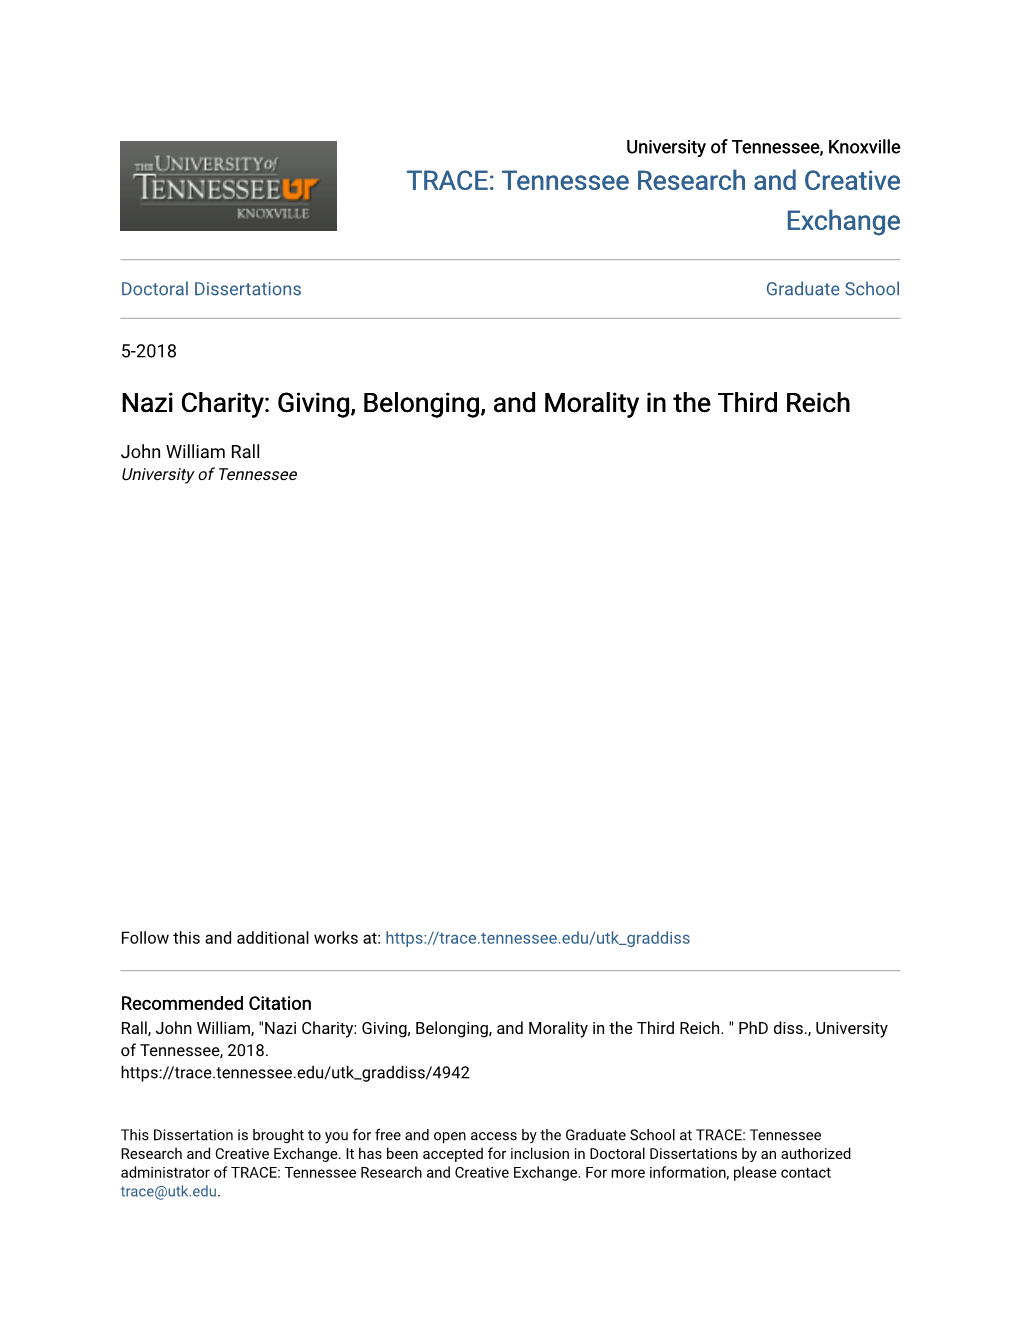 Nazi Charity: Giving, Belonging, and Morality in the Third Reich